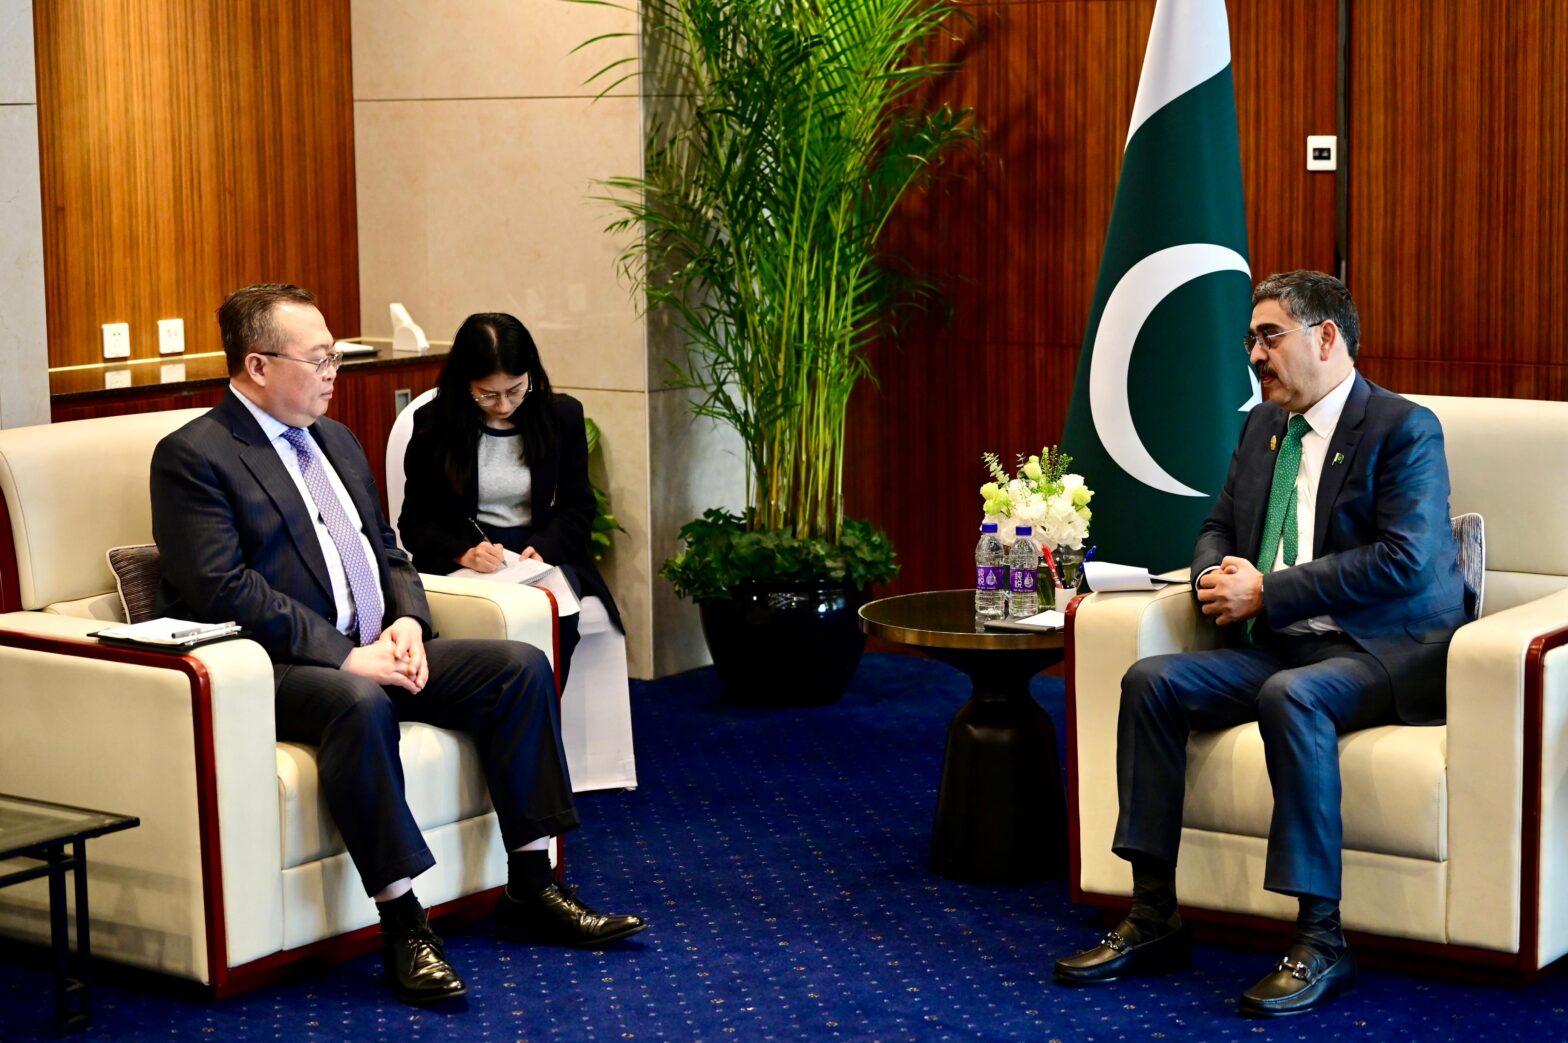 PM lauds CPC's role to cement Pak-China ties, fostering greater understanding